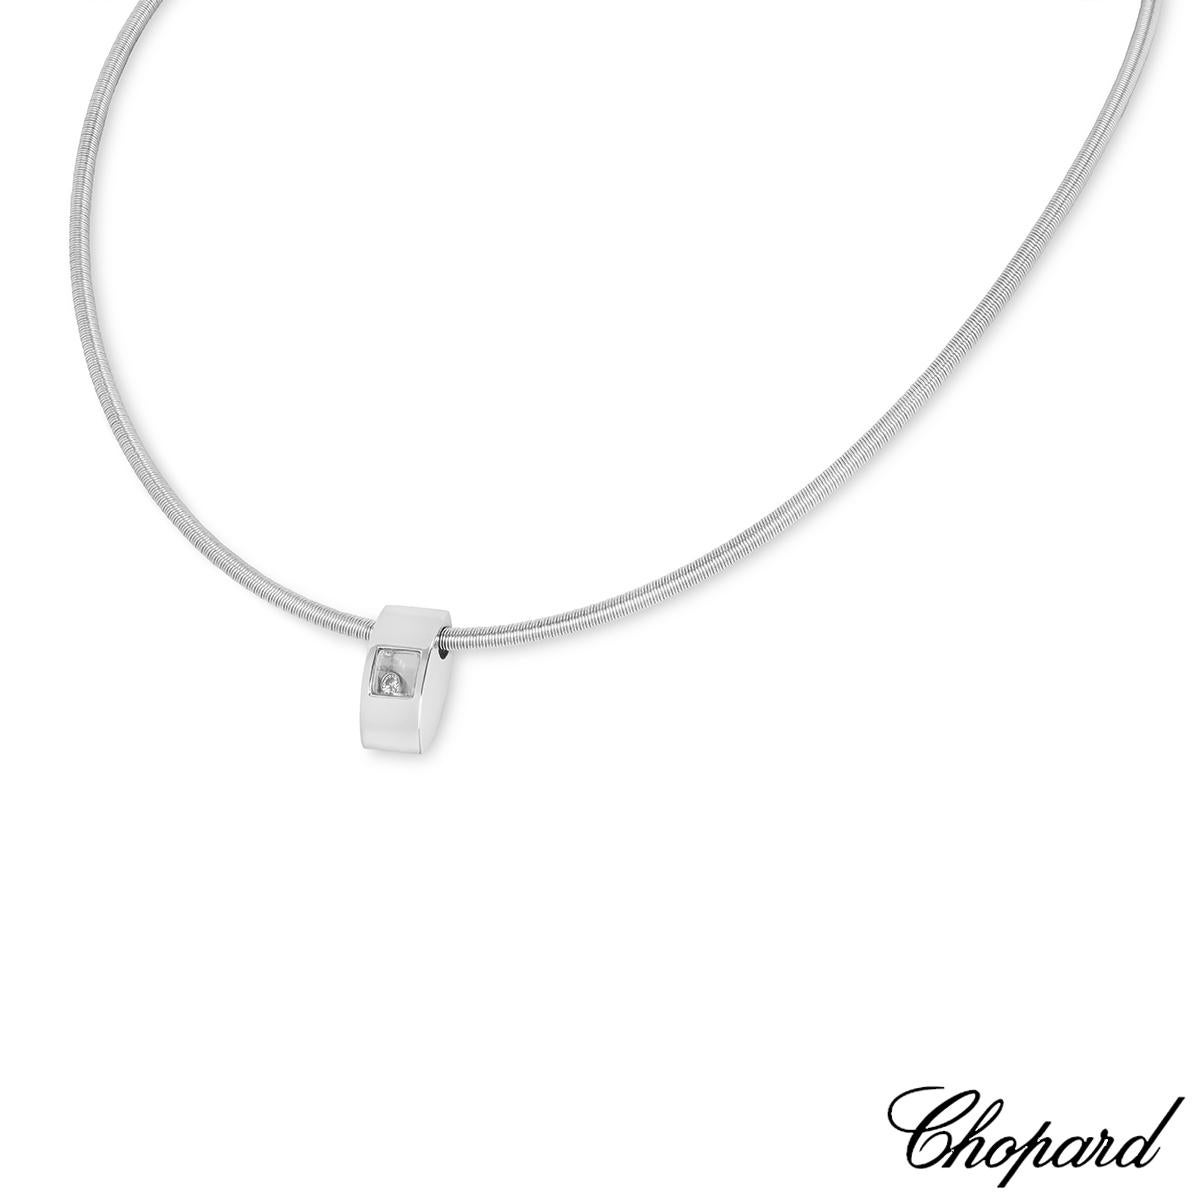 A lovely 18k white gold pendant by Chopard from the Happy Diamonds collection. The pendant features a single floating round brilliant cut diamond encased behind the iconic Chopard signed glass. The pendant measures 16mm in length and 8mm in width,